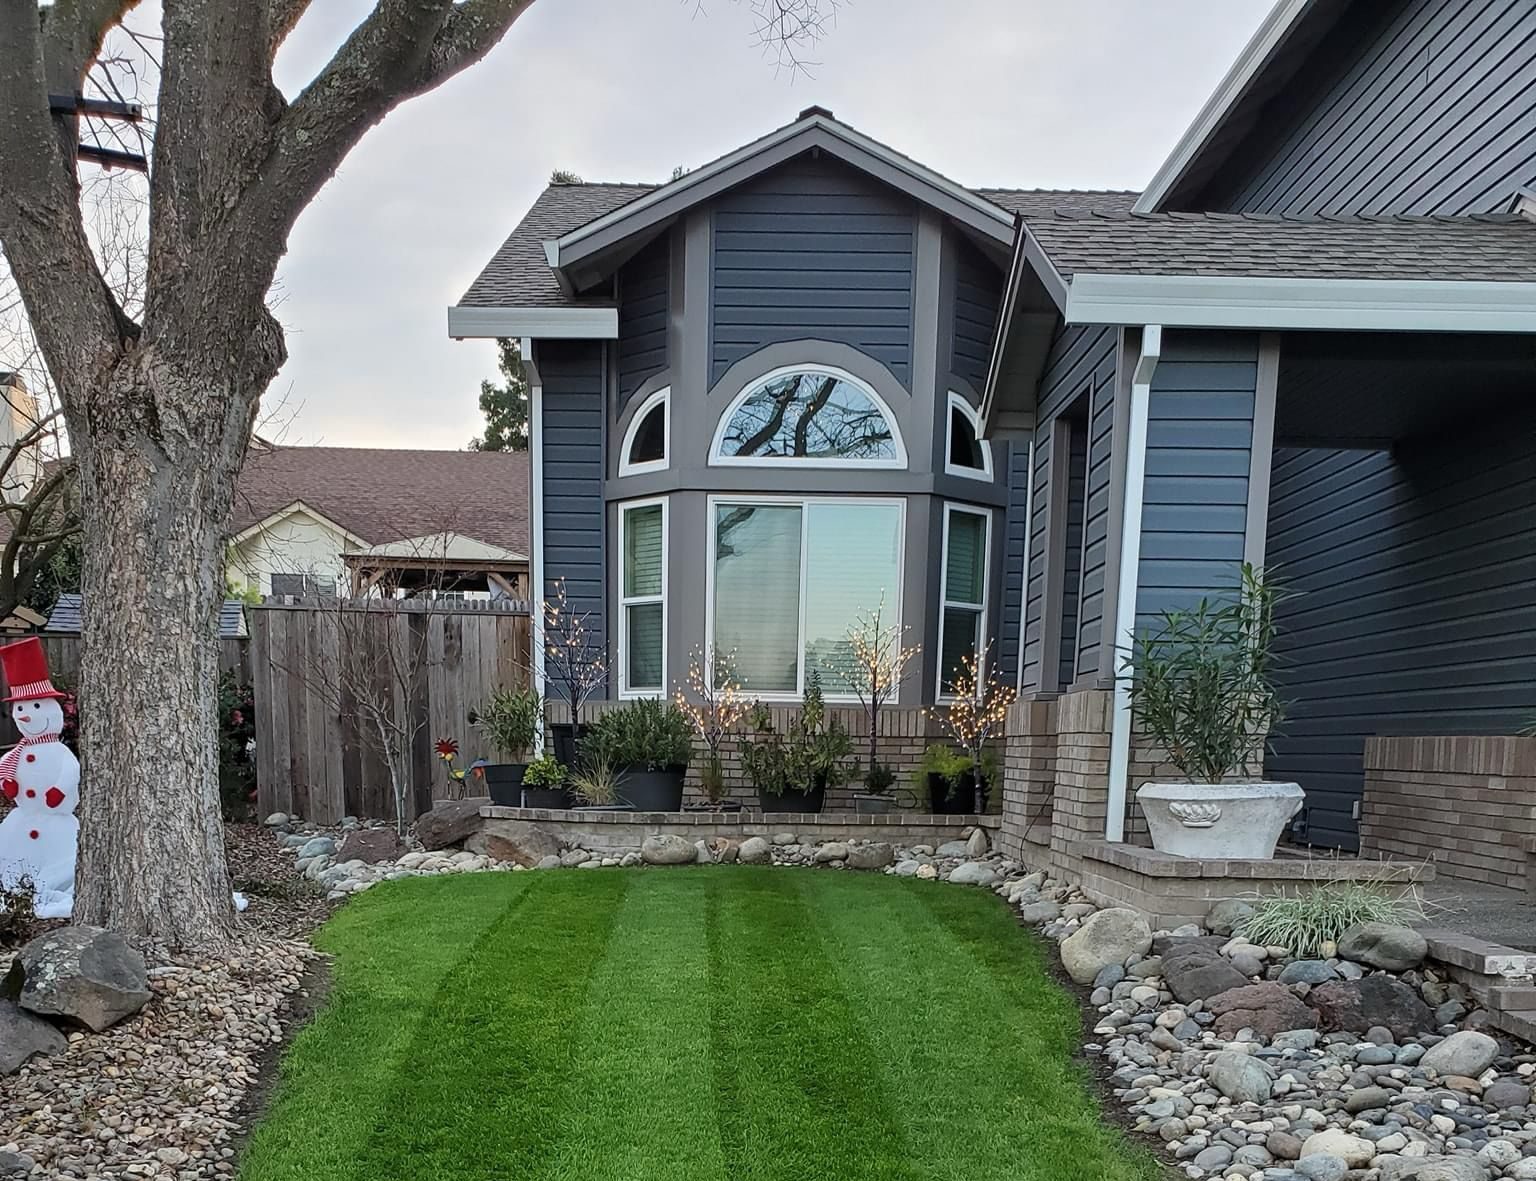  Lawn Care and Artificial Turf Installation in Norfolk ,VA